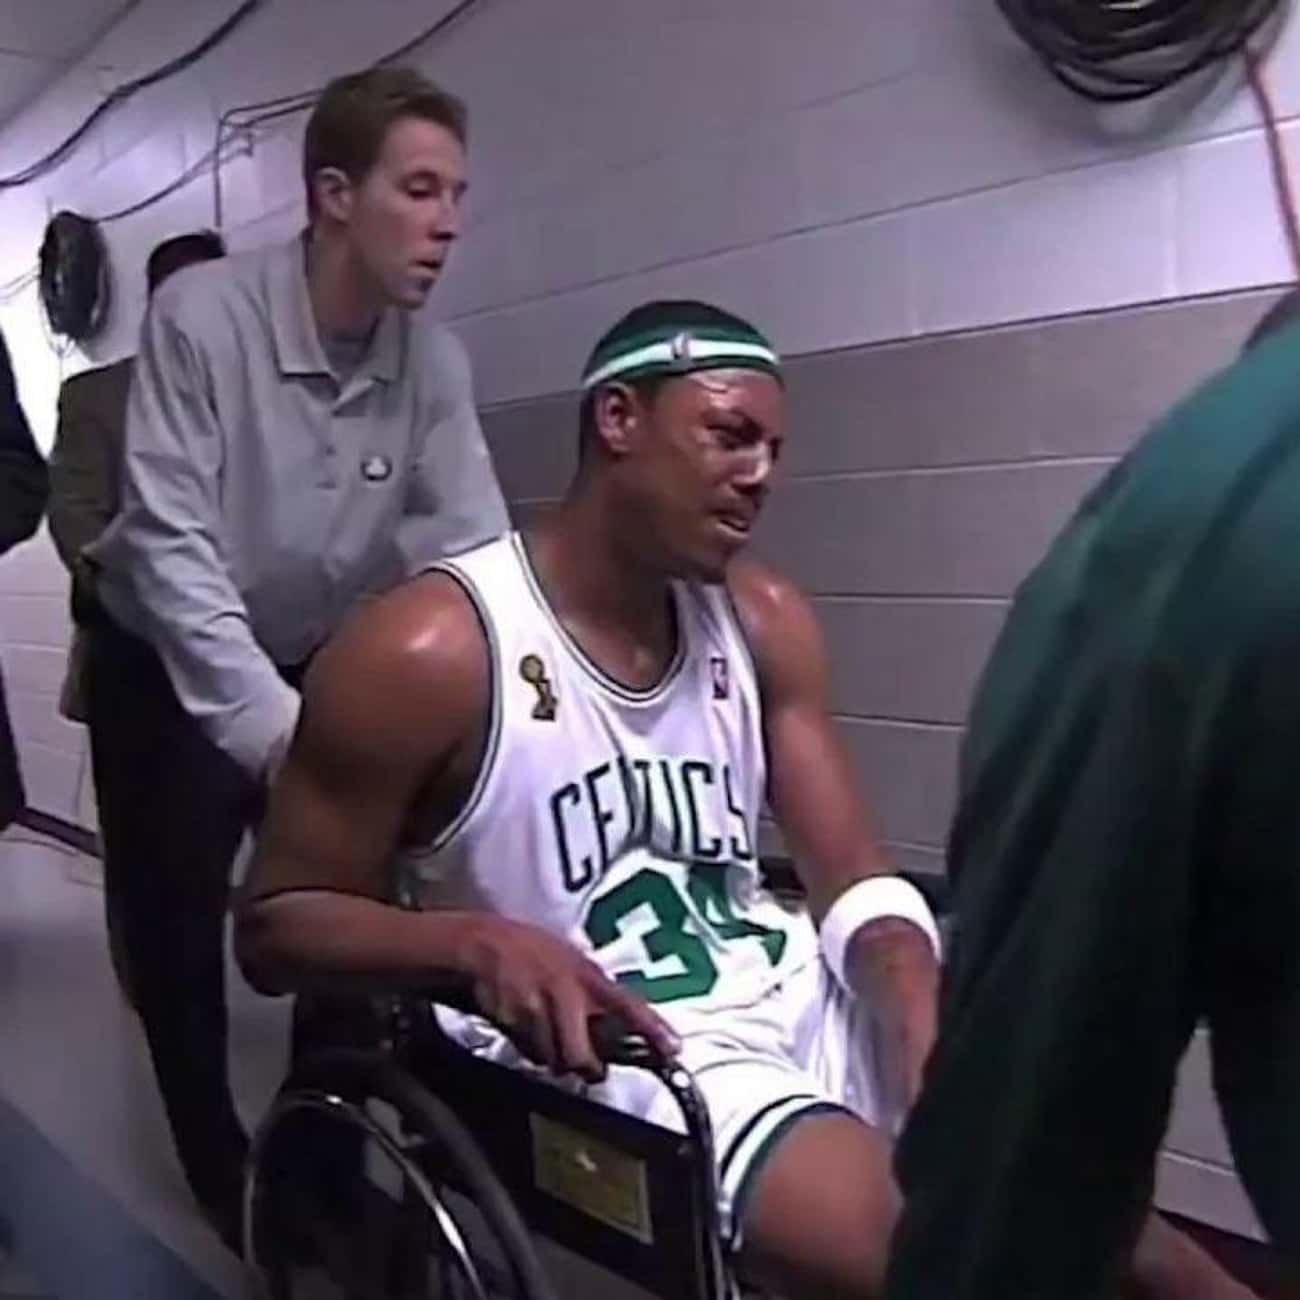 Paul Pierce Pooped His Pants And Faked An Injury During The 2008 Finals To Deal With It